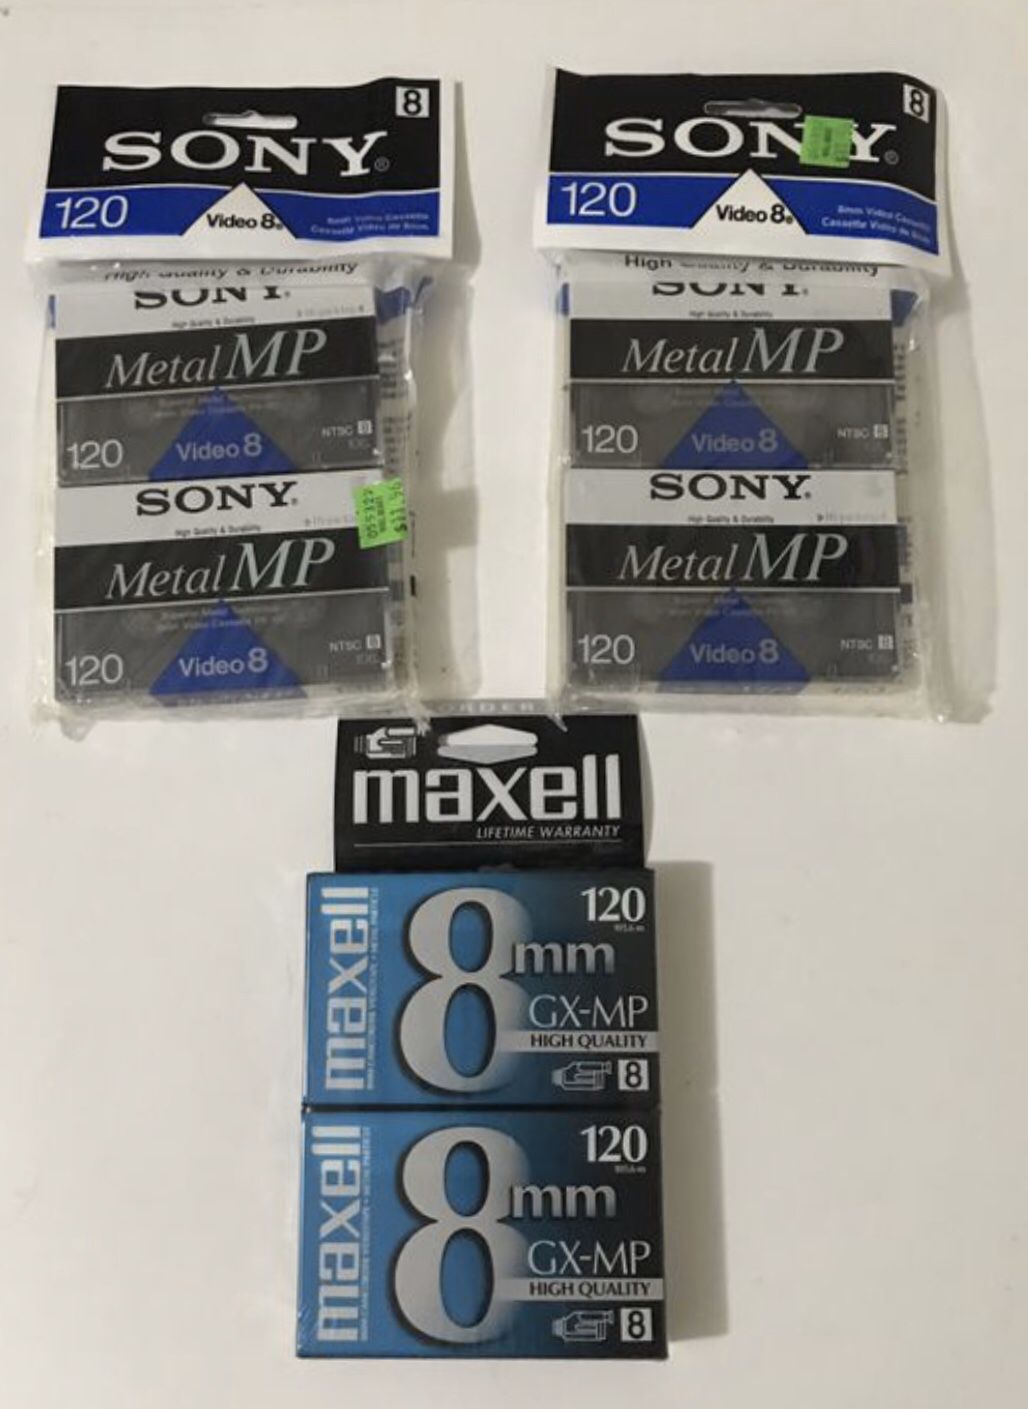 3 New Sony and Maxwell Tape Packs $3 Each